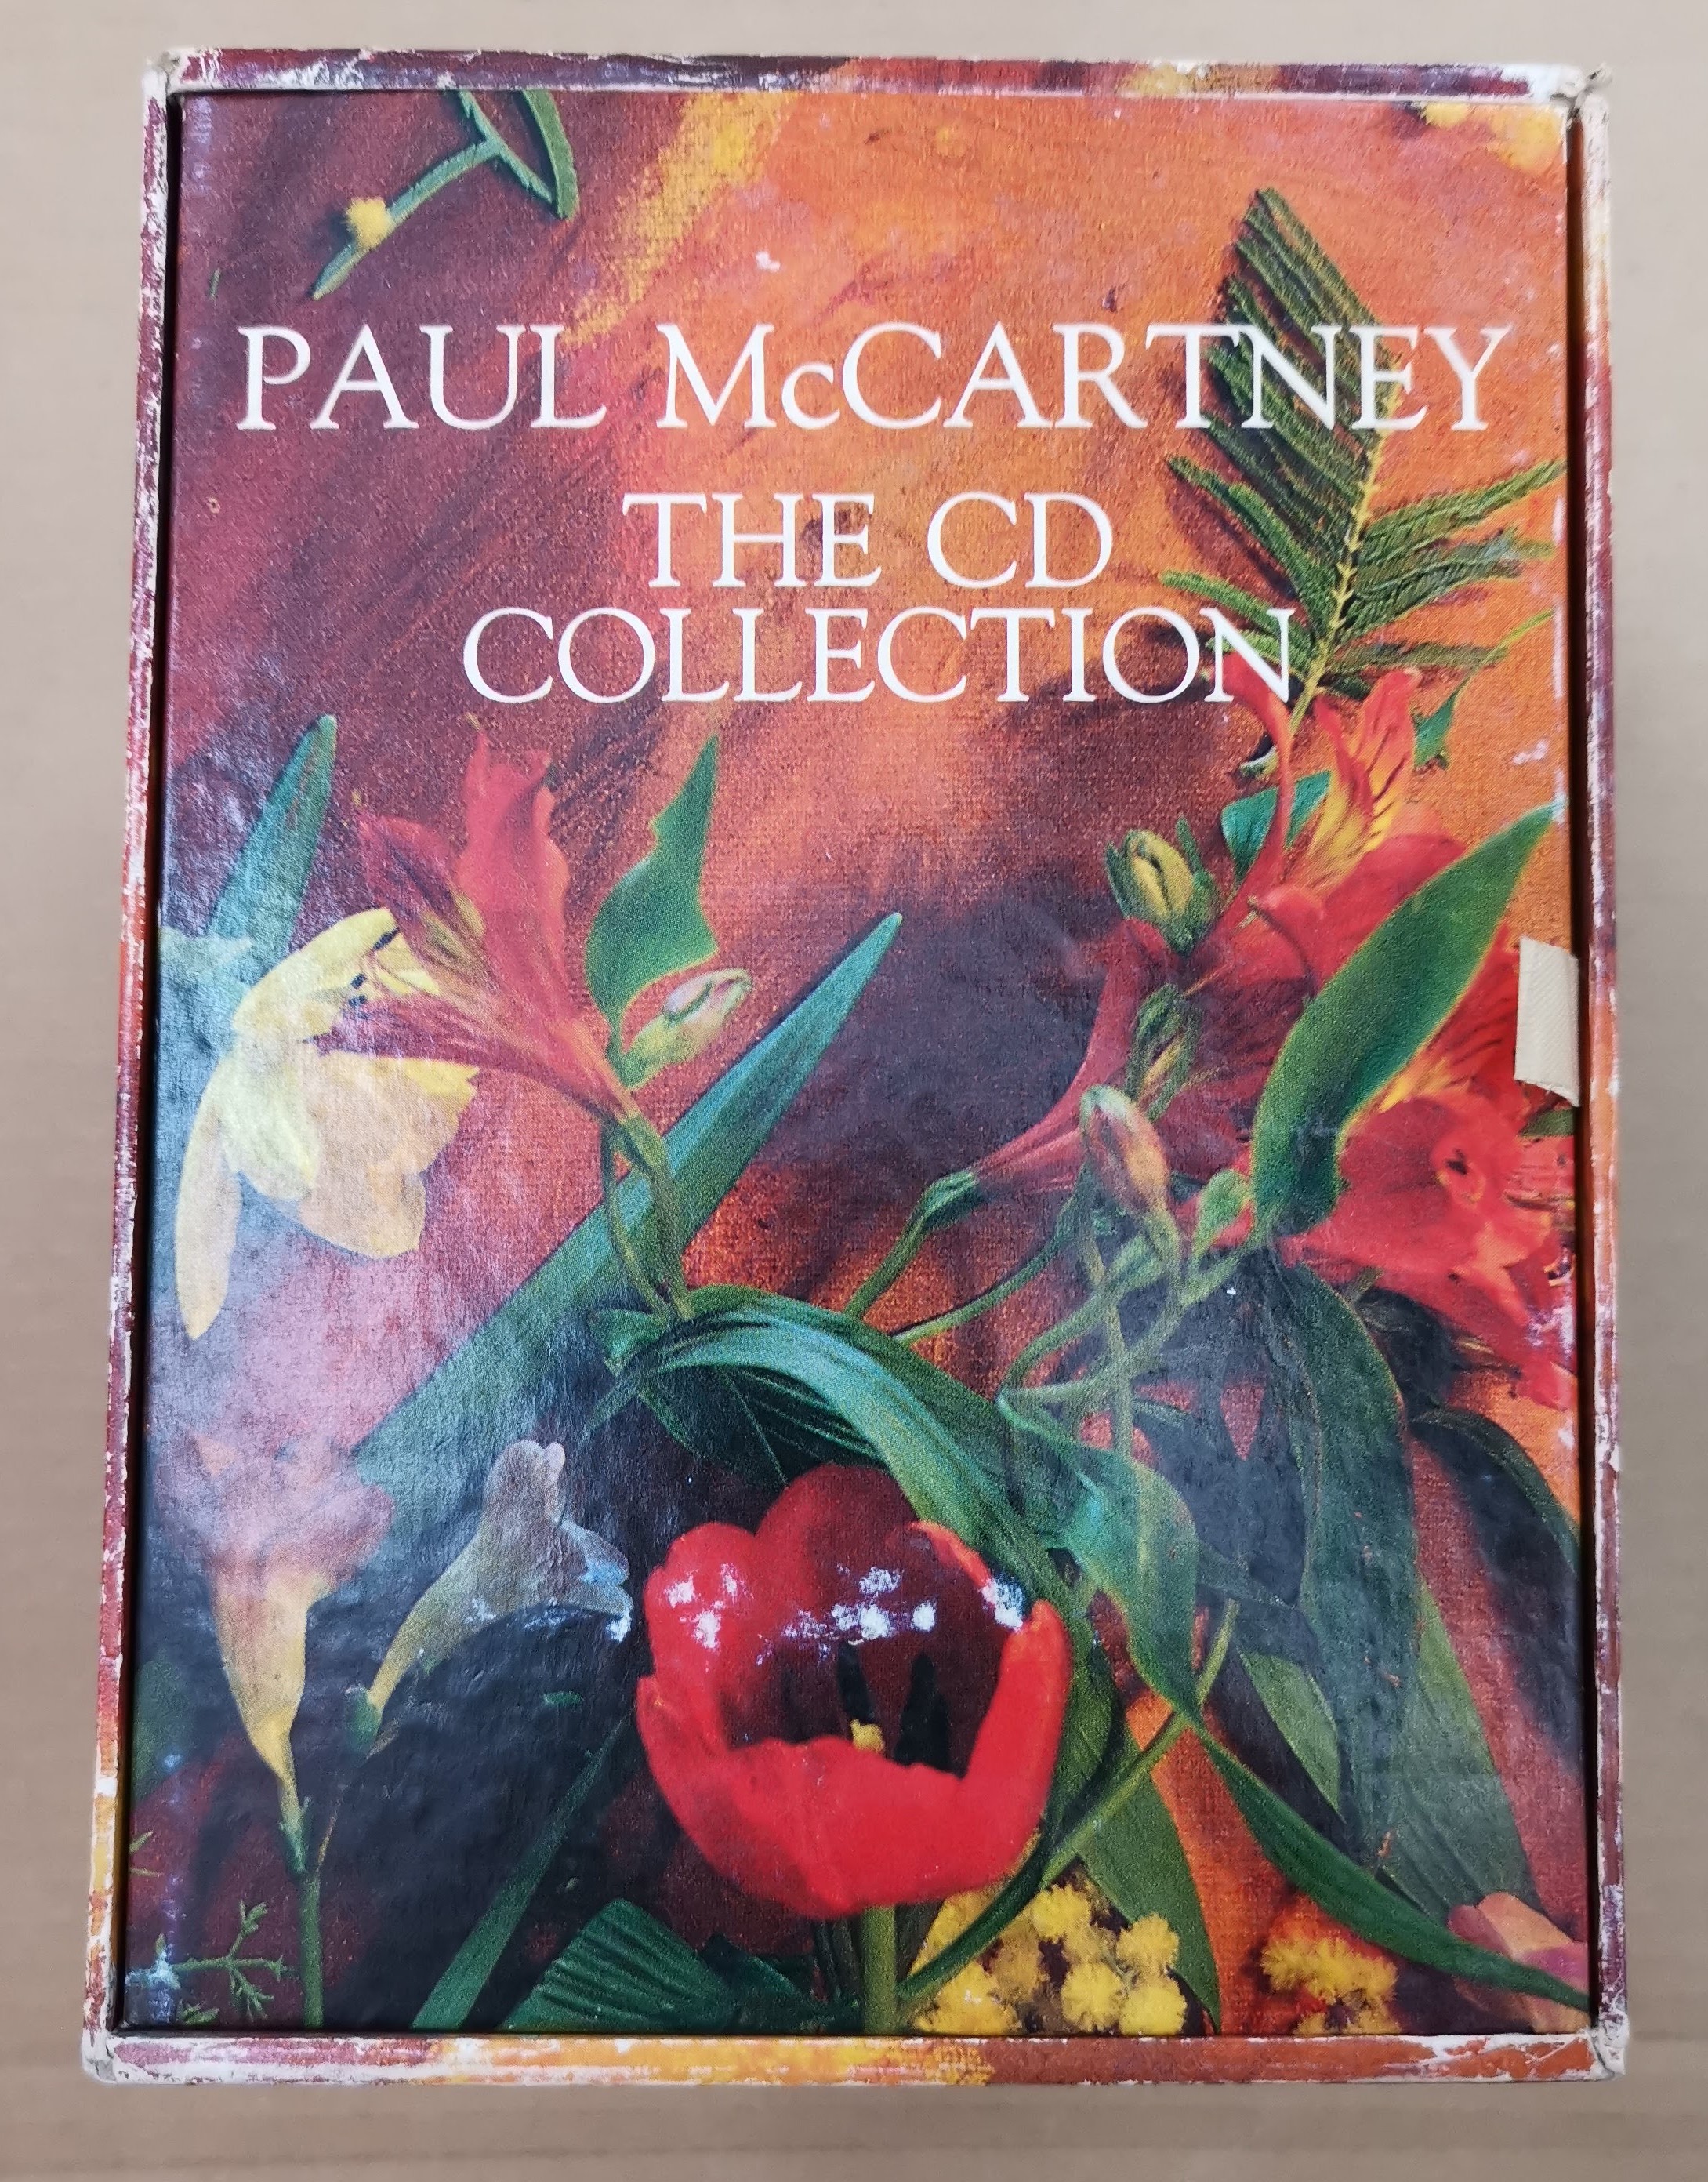 Paul McCartney/The CD Collection